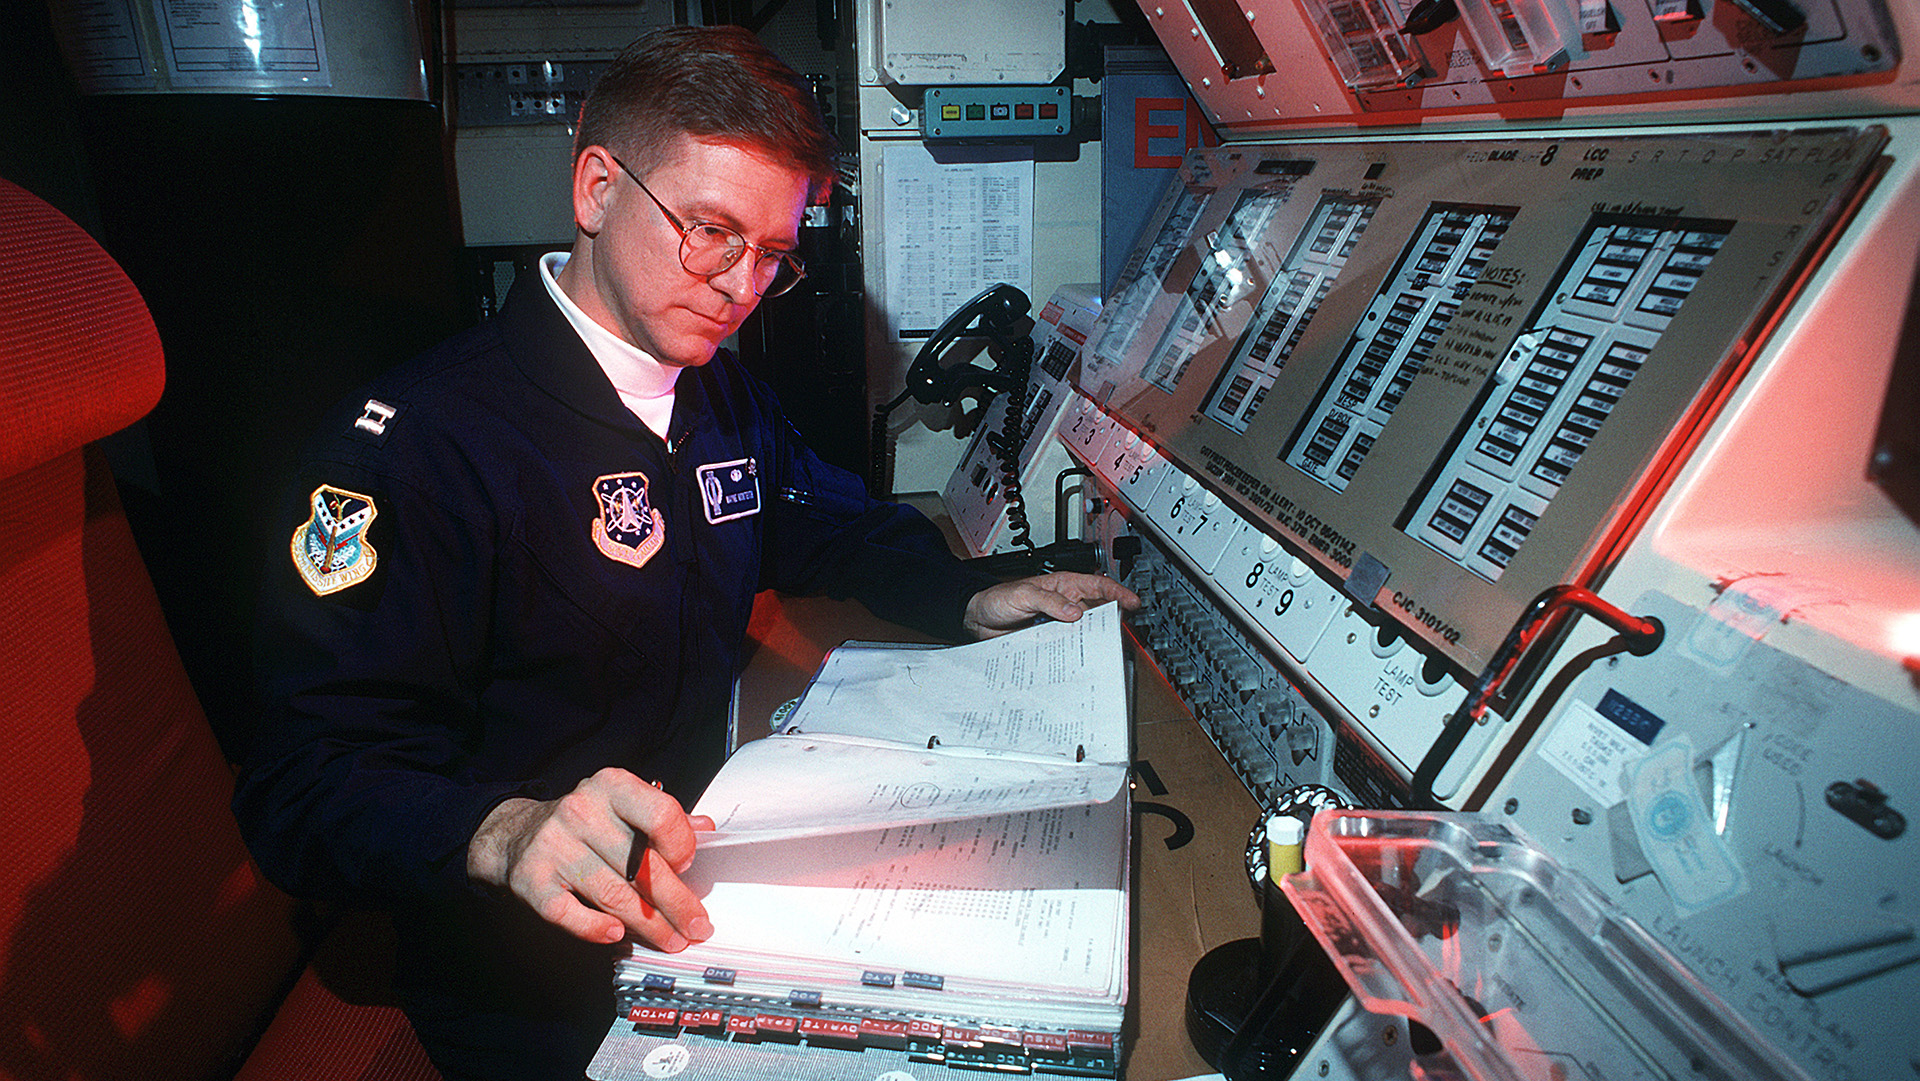 Capt. Wayne R. Monteith, 90th Operations Group, review procedures at the launch control station at one of the Peackeeper missile sites.